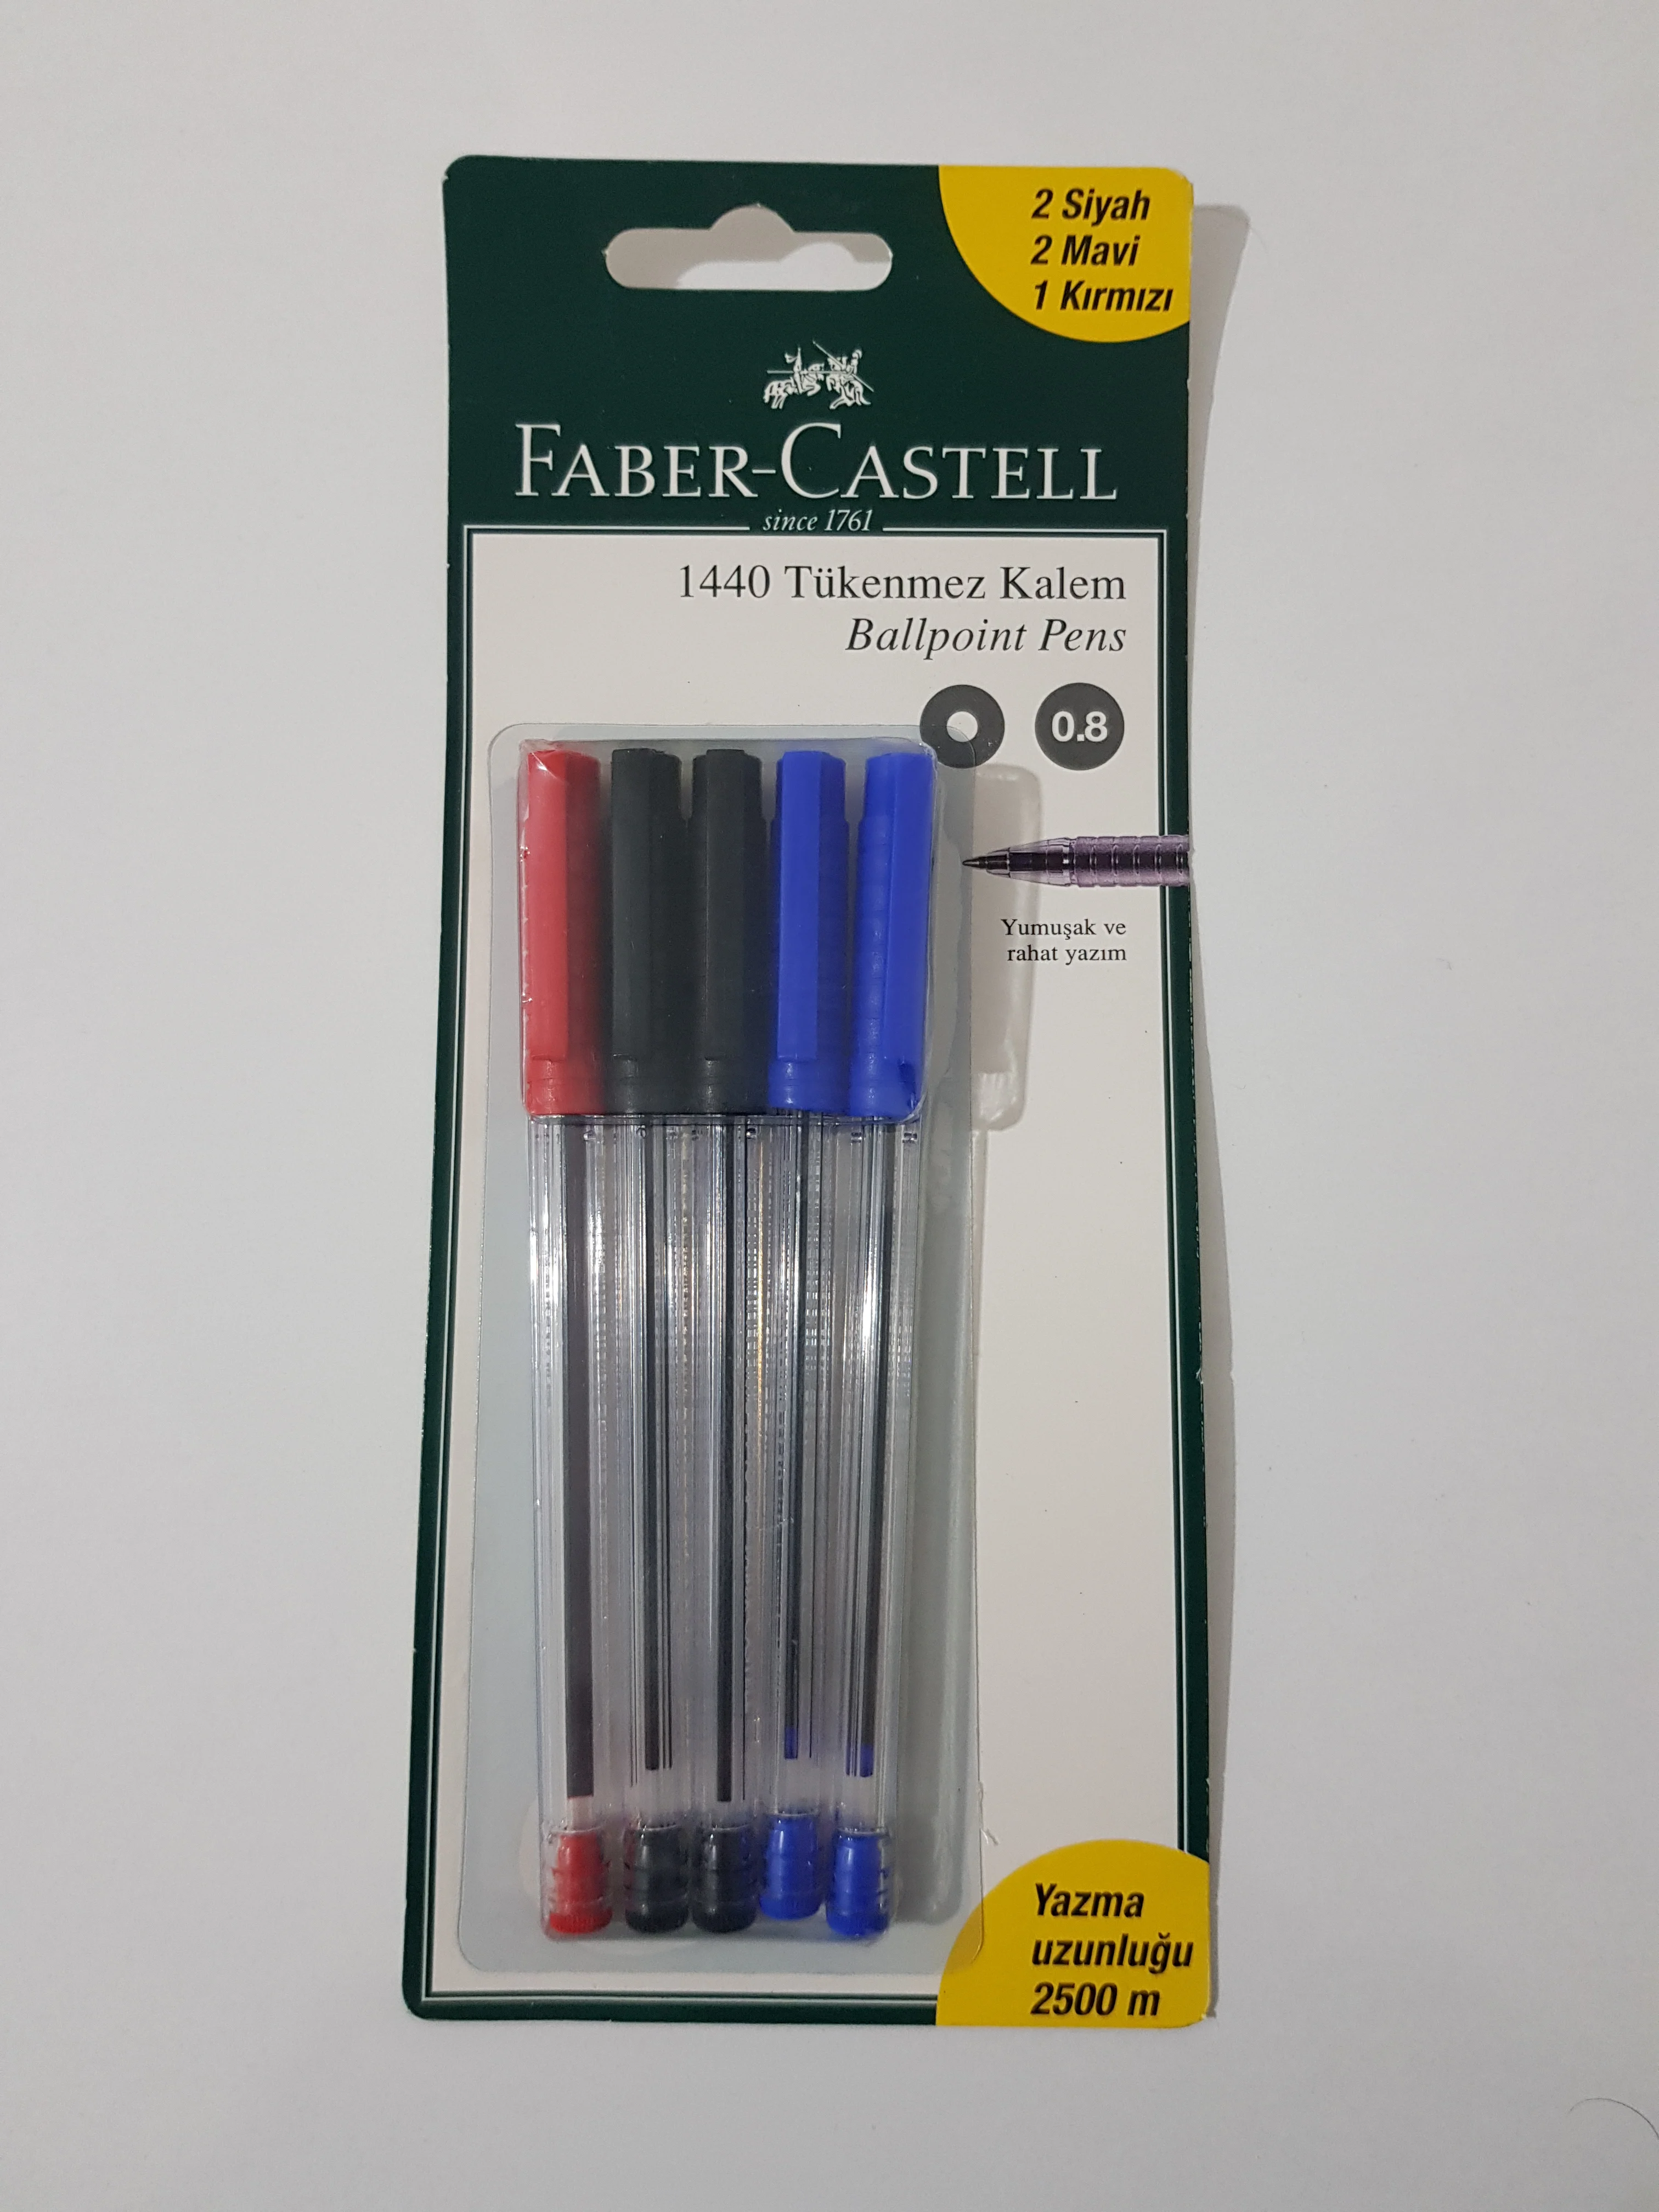 Ballpoint Pen One-Piece 5 PCs Office And Work Place Günlük Areas For Practical Writing And Day Hold Ideal